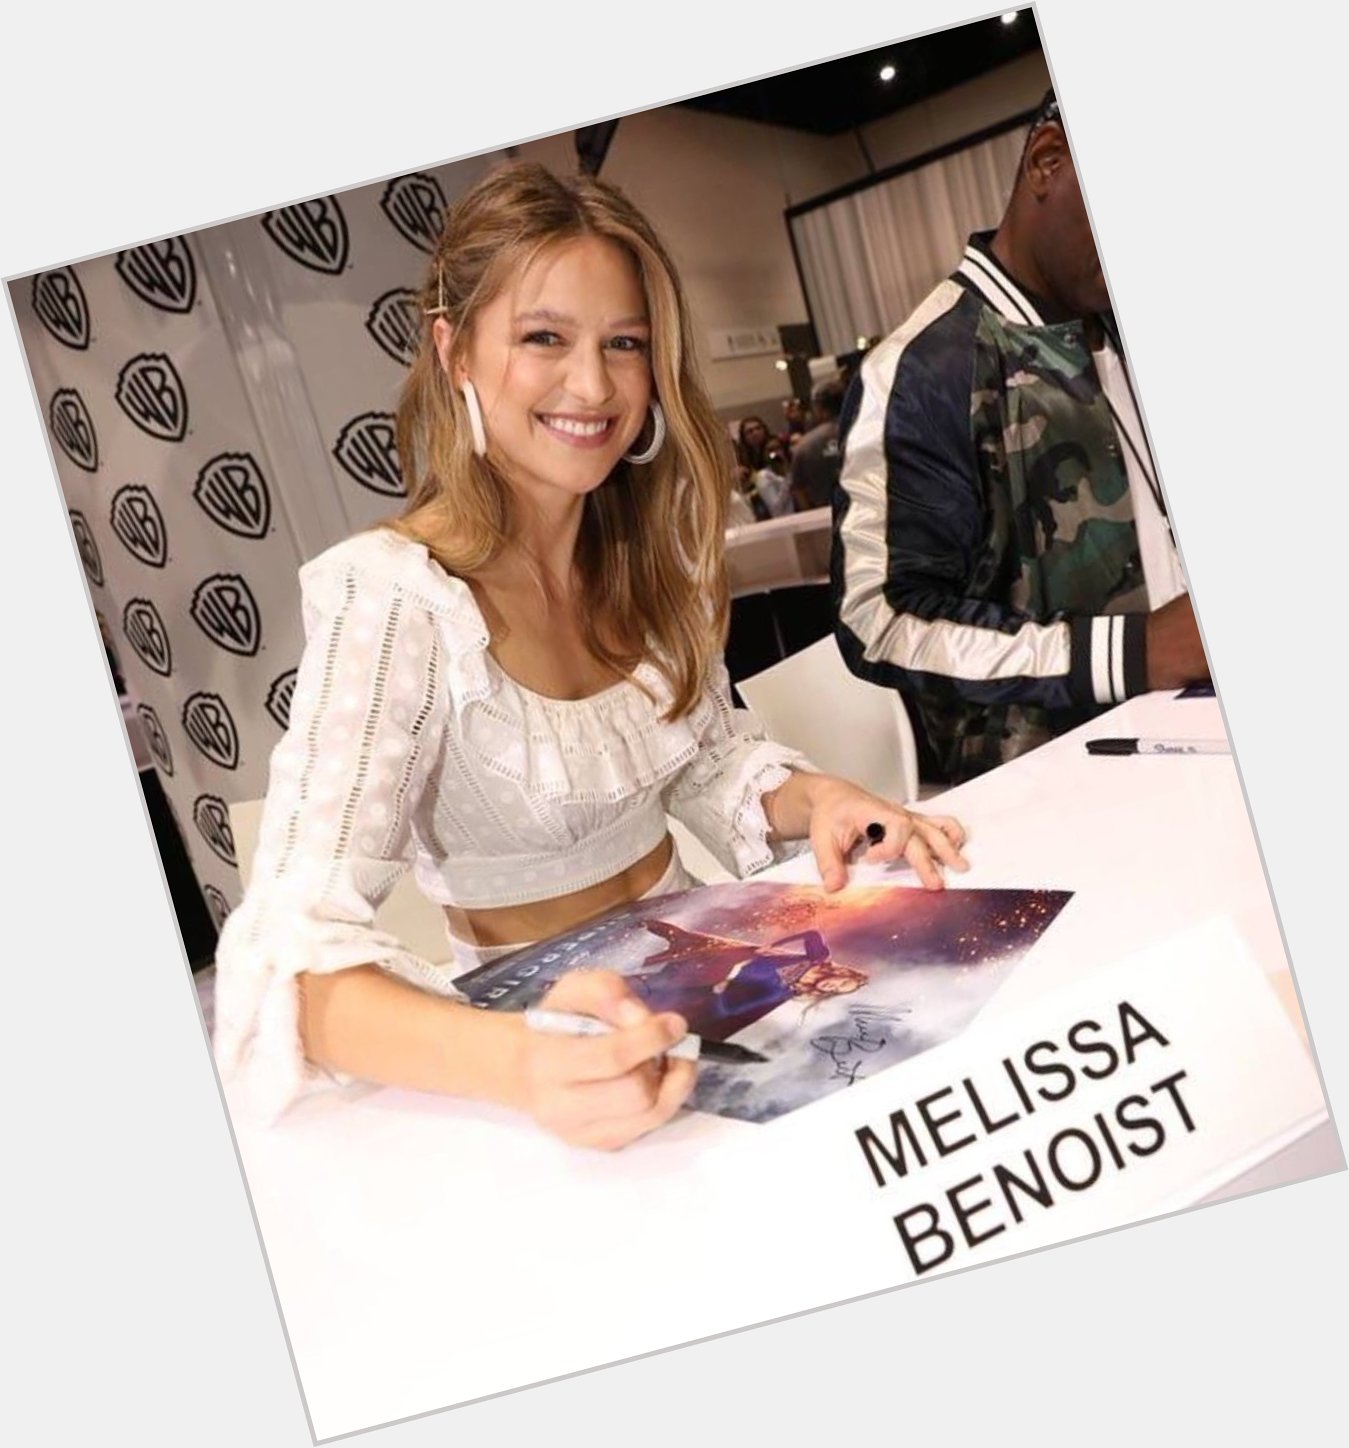 HAPPY BIRTHDAY TO OUR STRONG, AMAZING, INCREDIBLE, BEAUTIFUL AND WONDERFUL SUPERGIRL MELISSA BENOIST!      